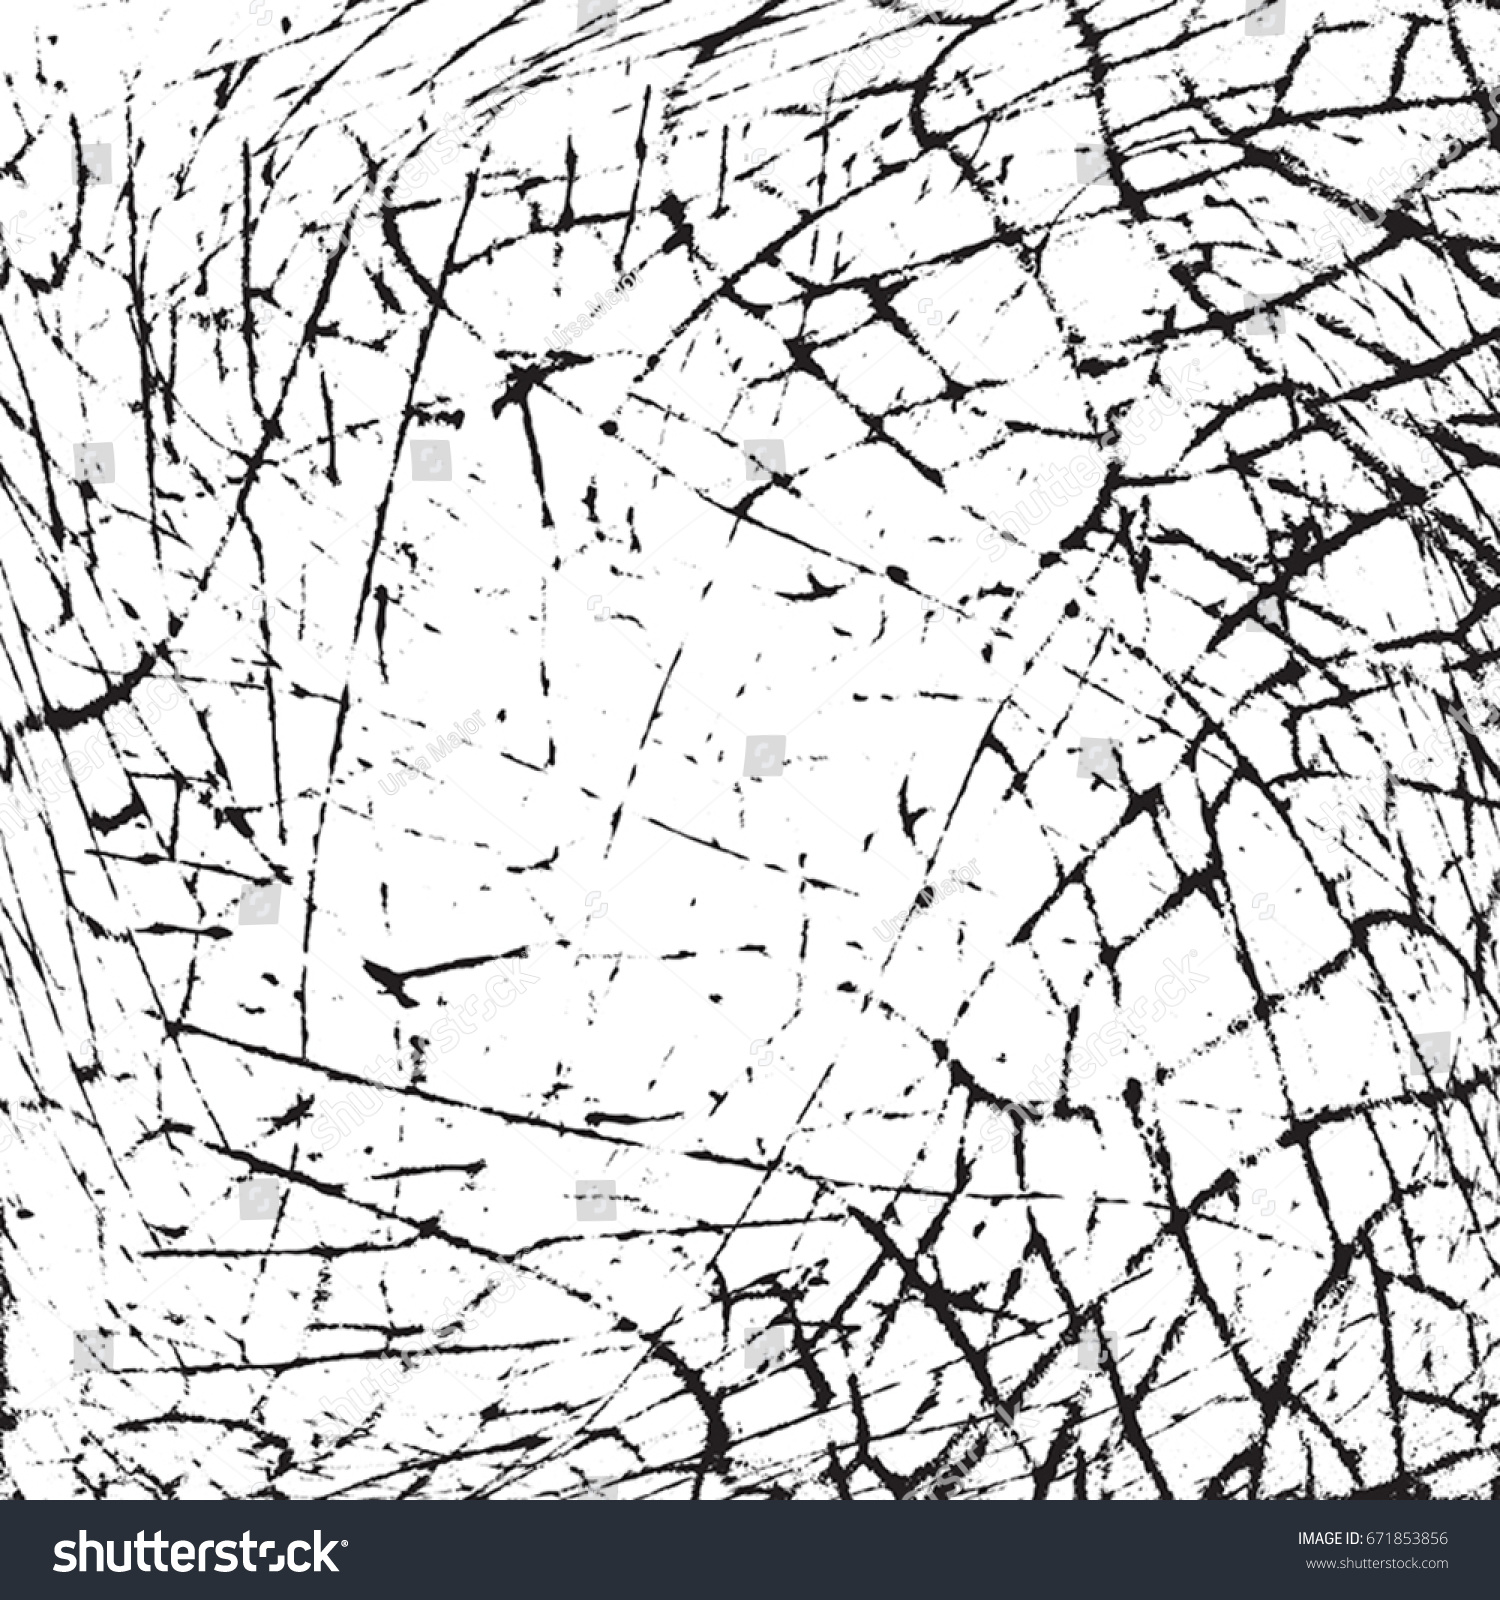 Distress Overlay Aged Cracked Texture Grunge Stock Vector 671853856 ...